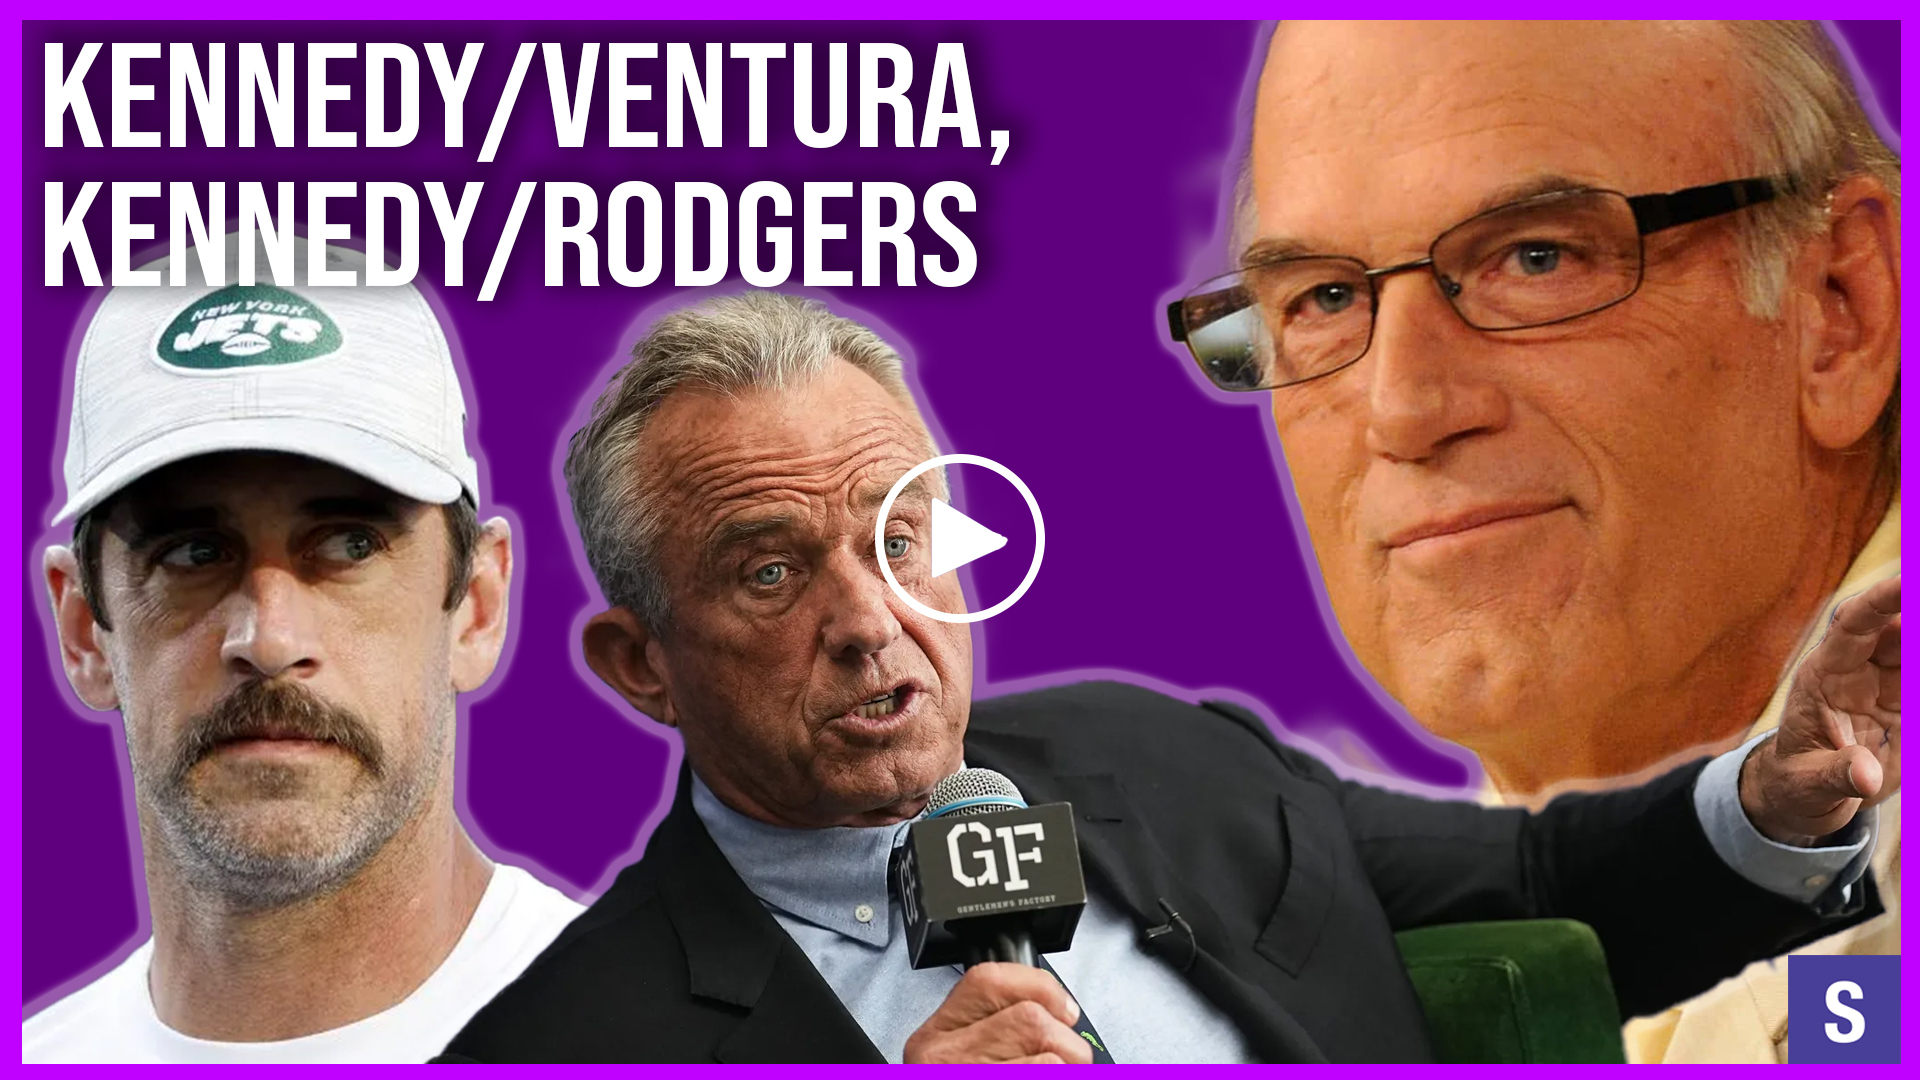 Kennedy/Ventura, Kennedy/Rodgers #2024elections #politics